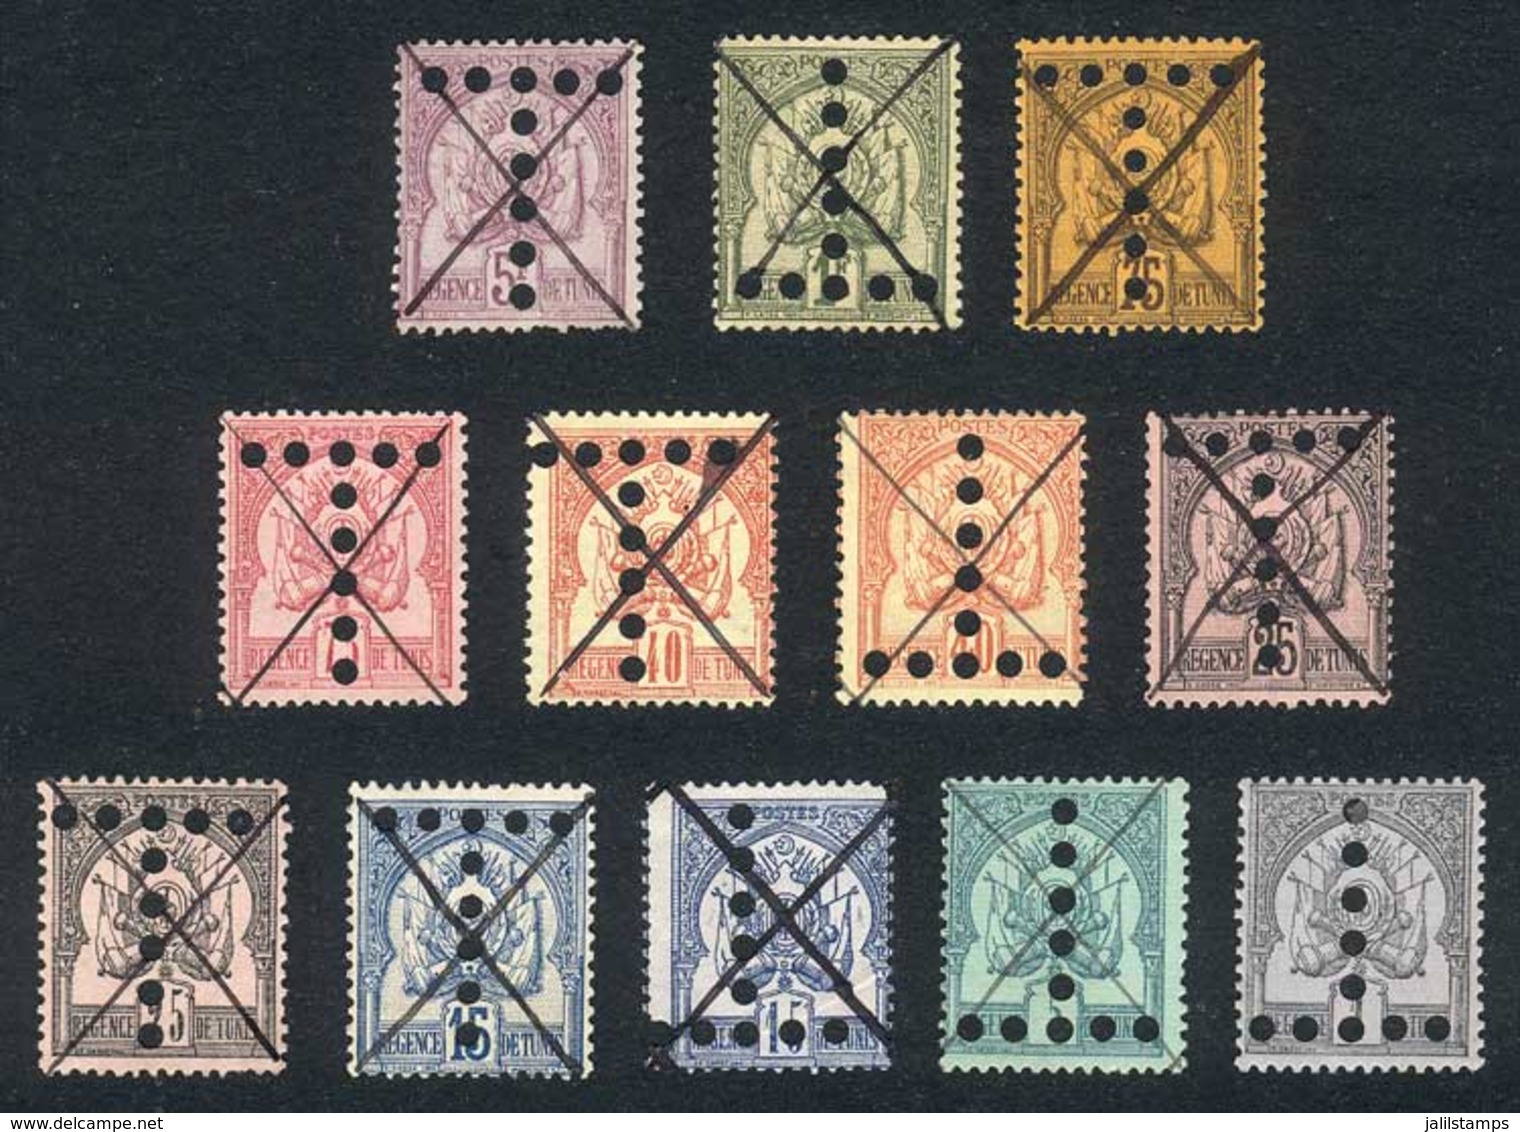 1228 TUNISIA: Lot Of Old Postage Due Stamps, Used Or Mint Without Gum, Excellent Qual - Tunisia